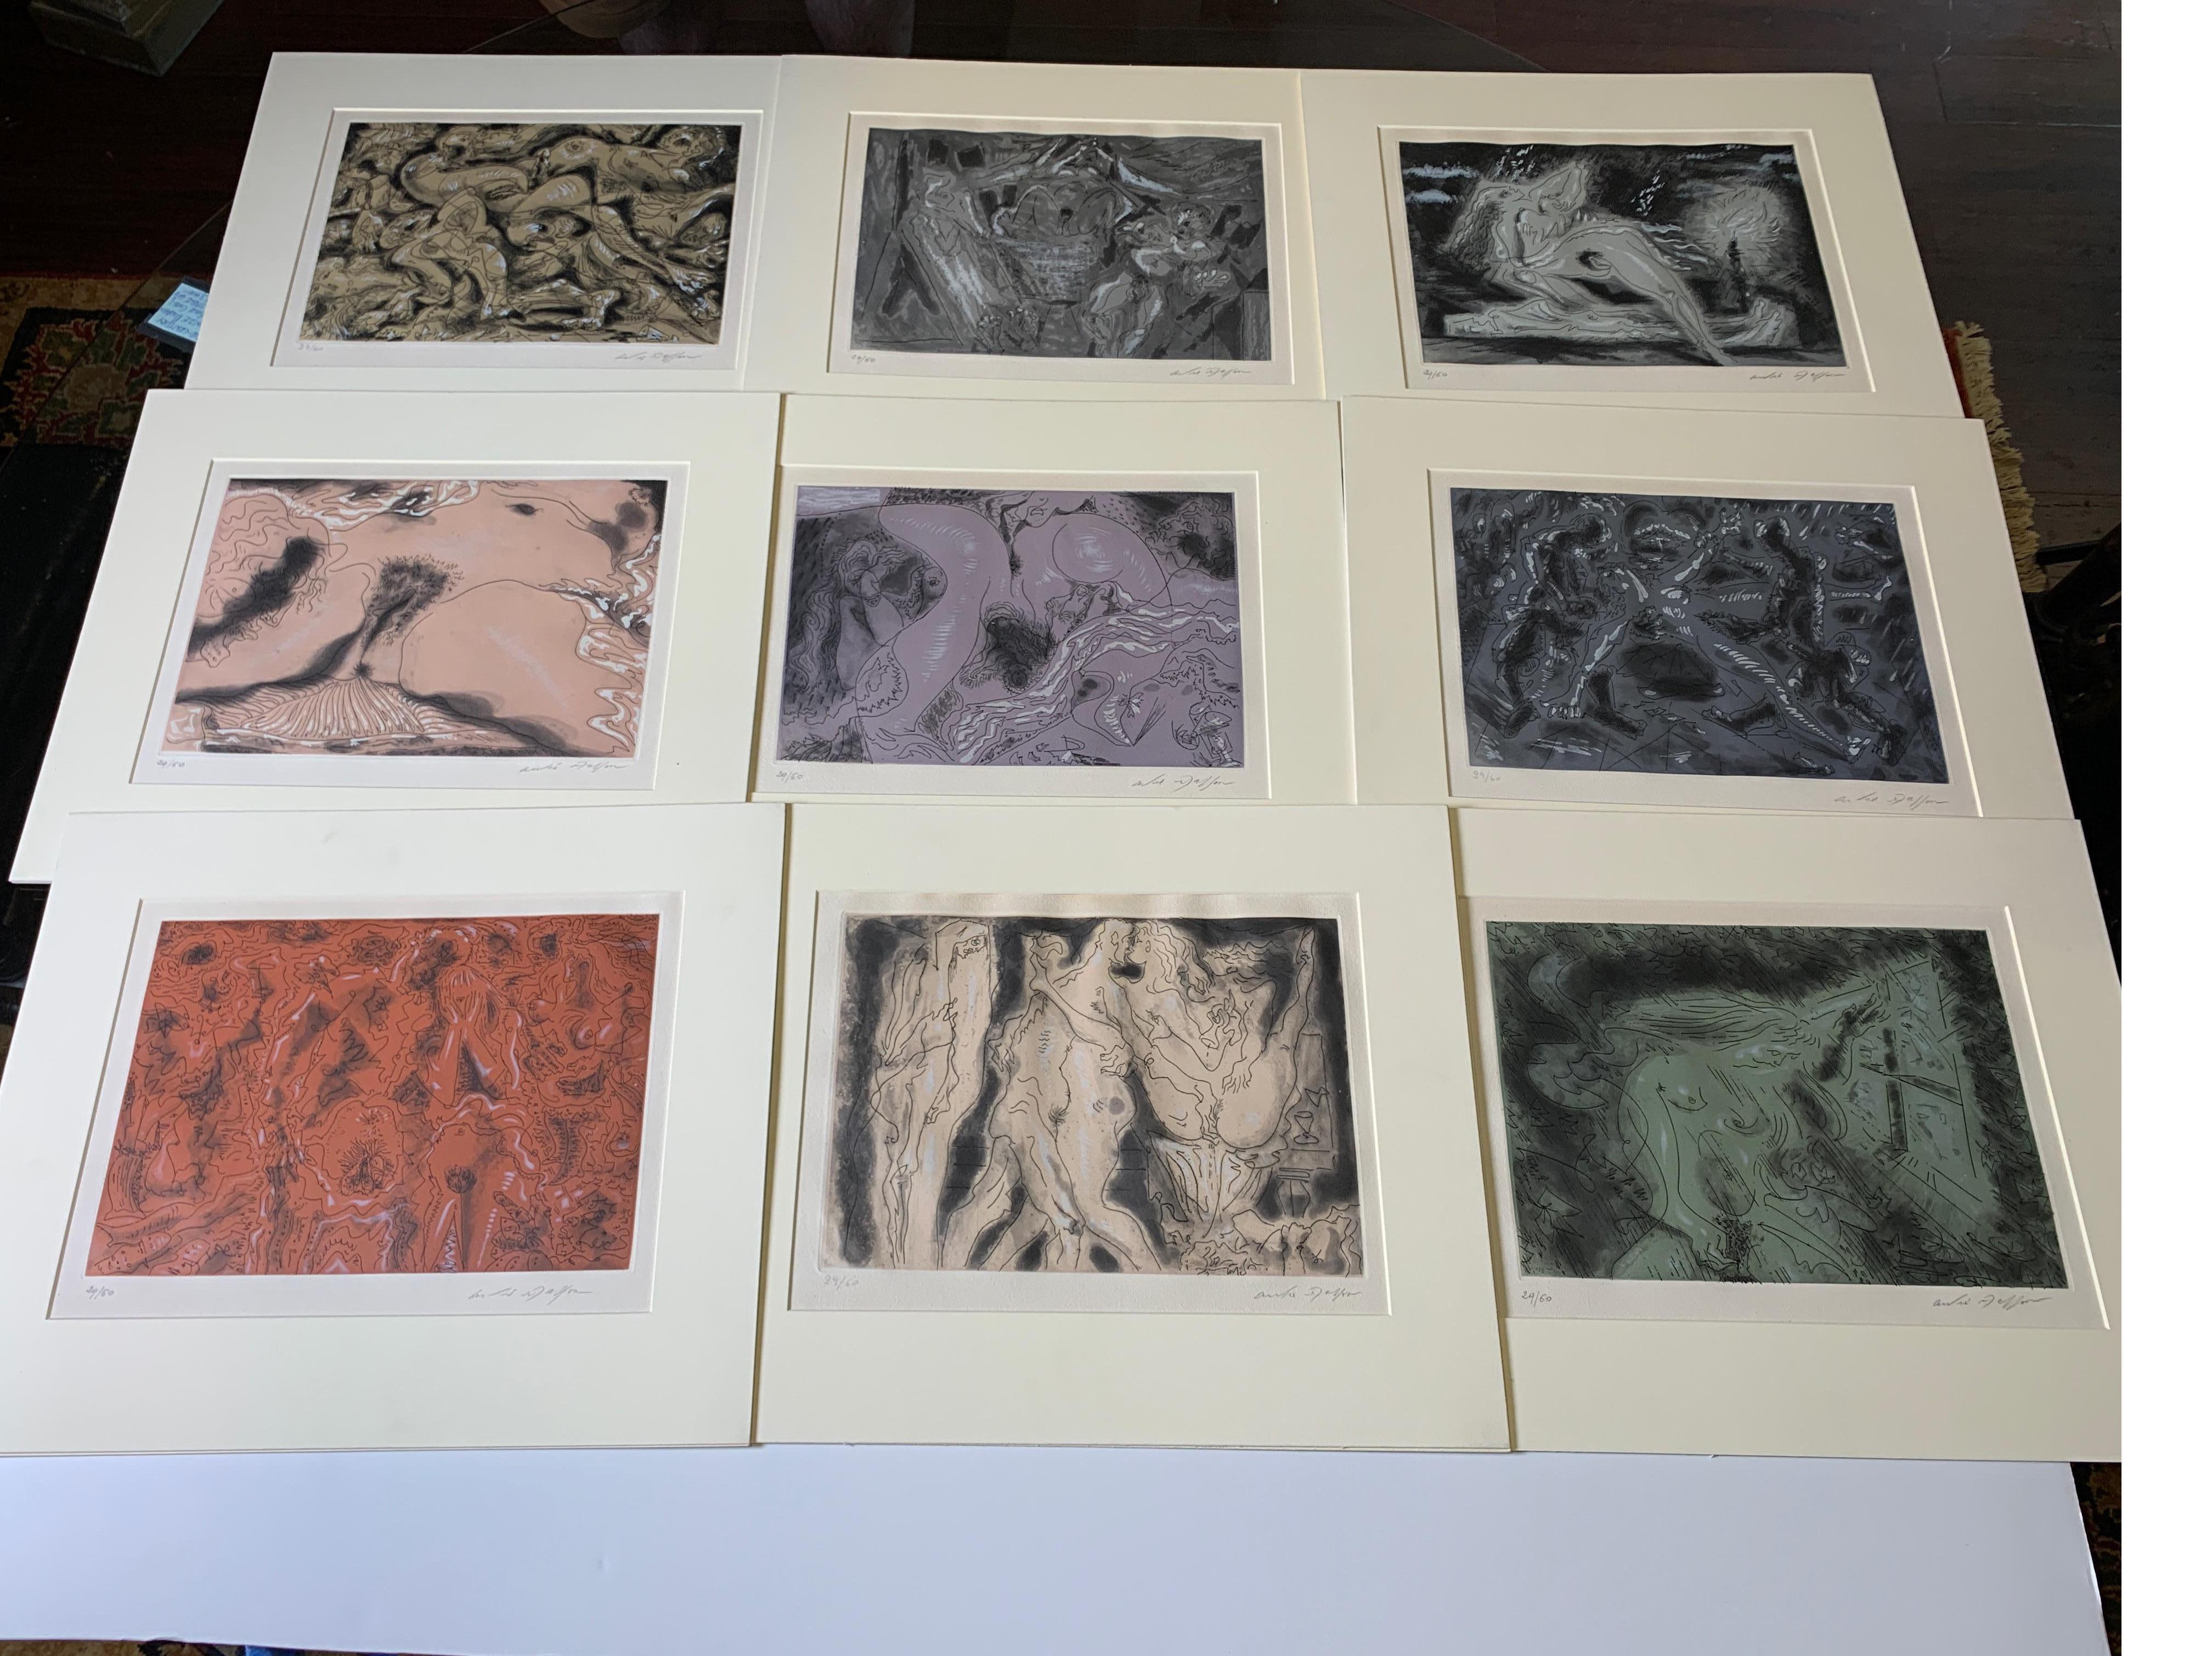 Series of Nine Surrealist Erotic Lithographs by Andre Masson, Signed / Numbered 13